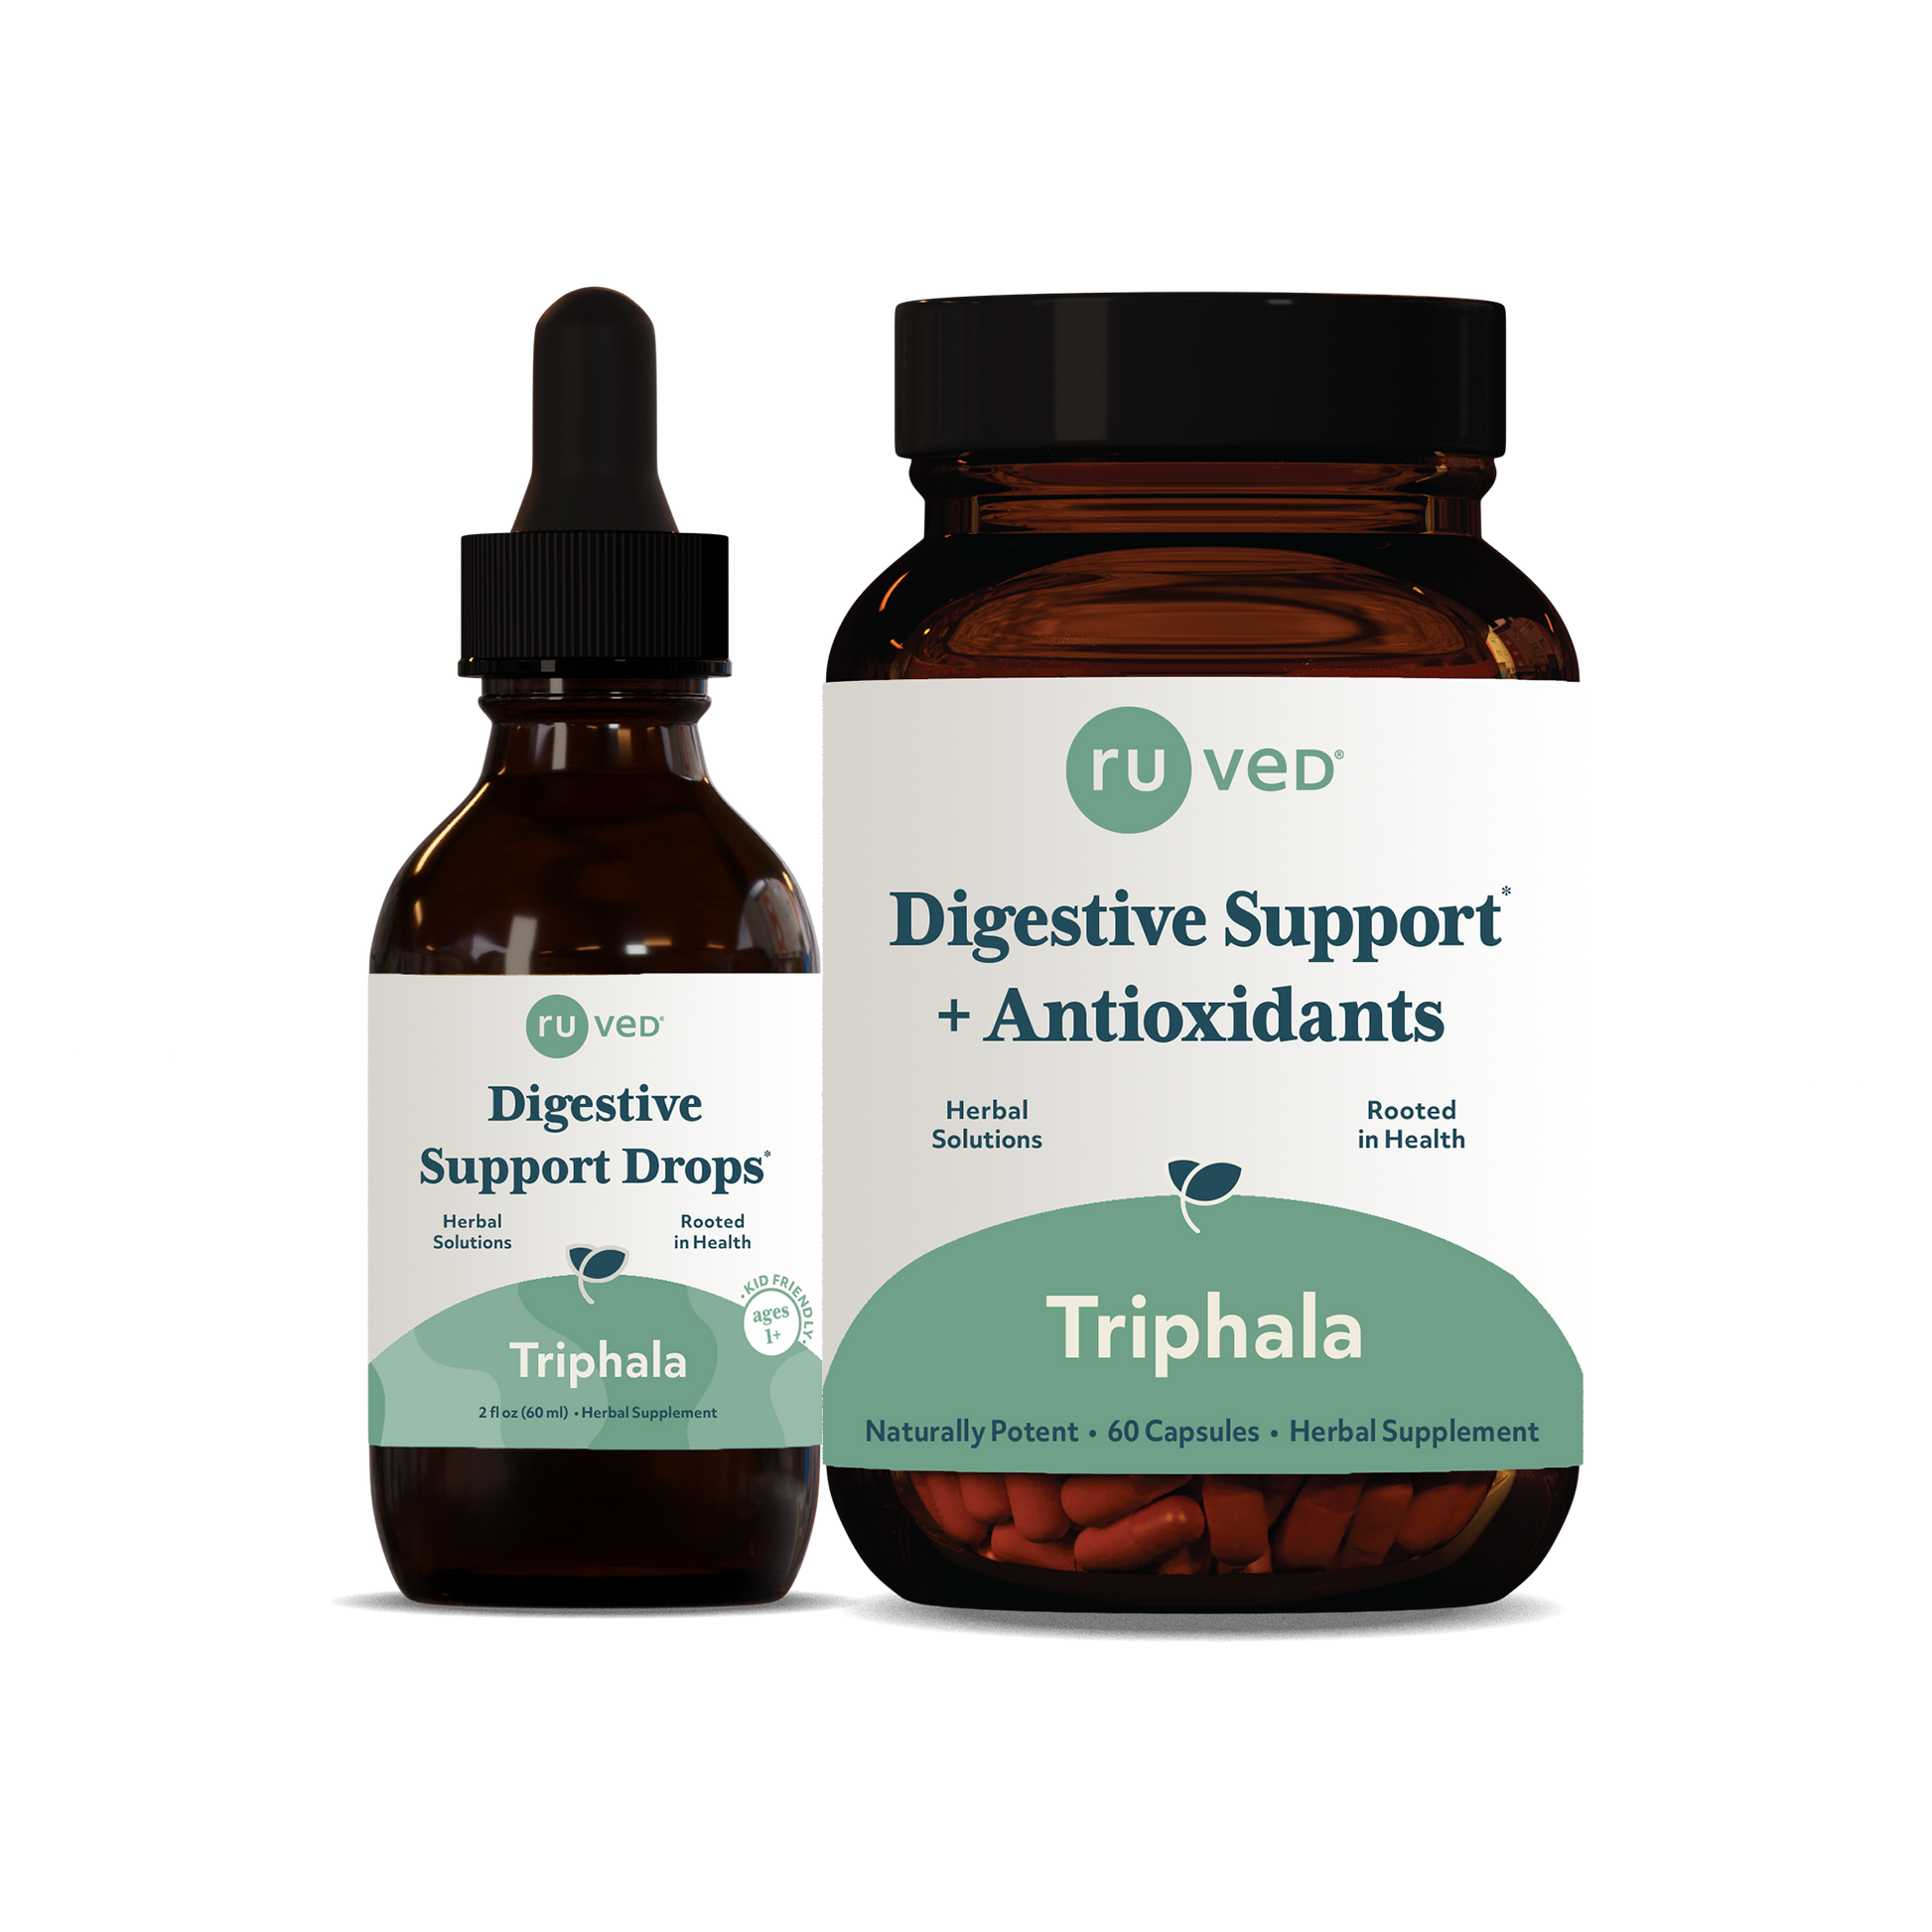 Triphala Capsules and Drops - Ayurvedic Digestive Support, 60 Vegetarian Capsules, 60ml Bottle, Herbal Blend for Gut Health and Digestion Detoxification.